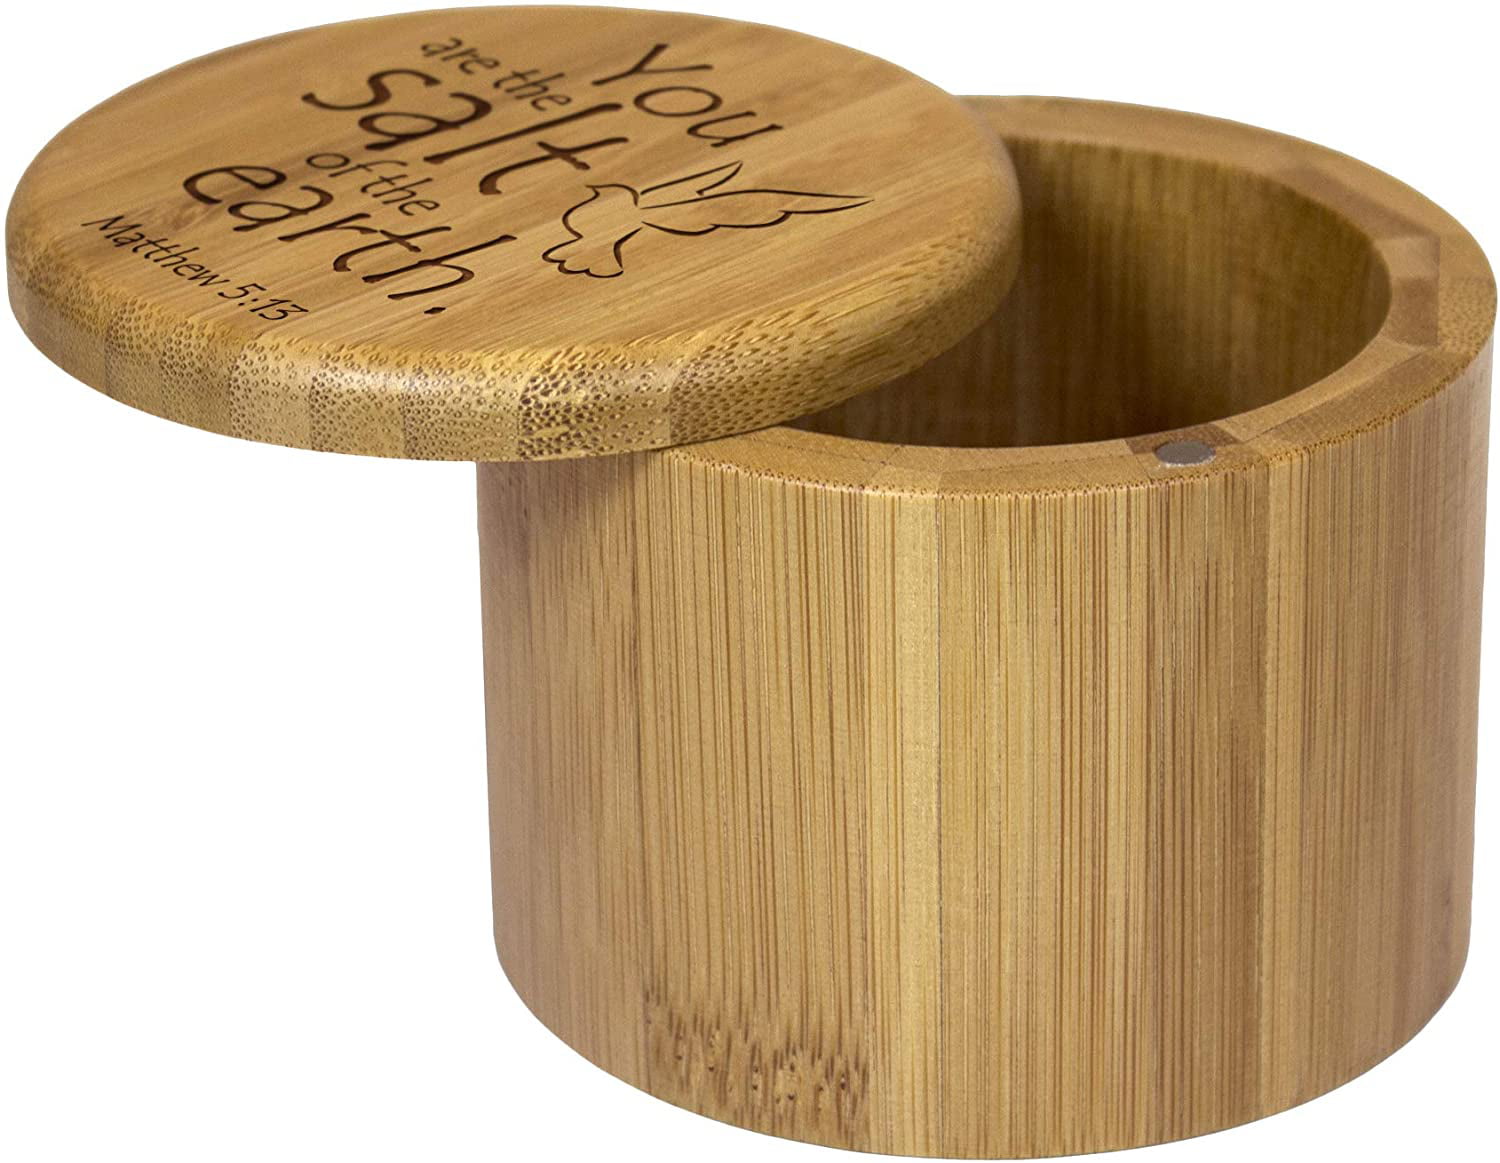 Totally Bamboo Salt BoxBamboo Storage Box with Magnetic Swivel LidYou are 